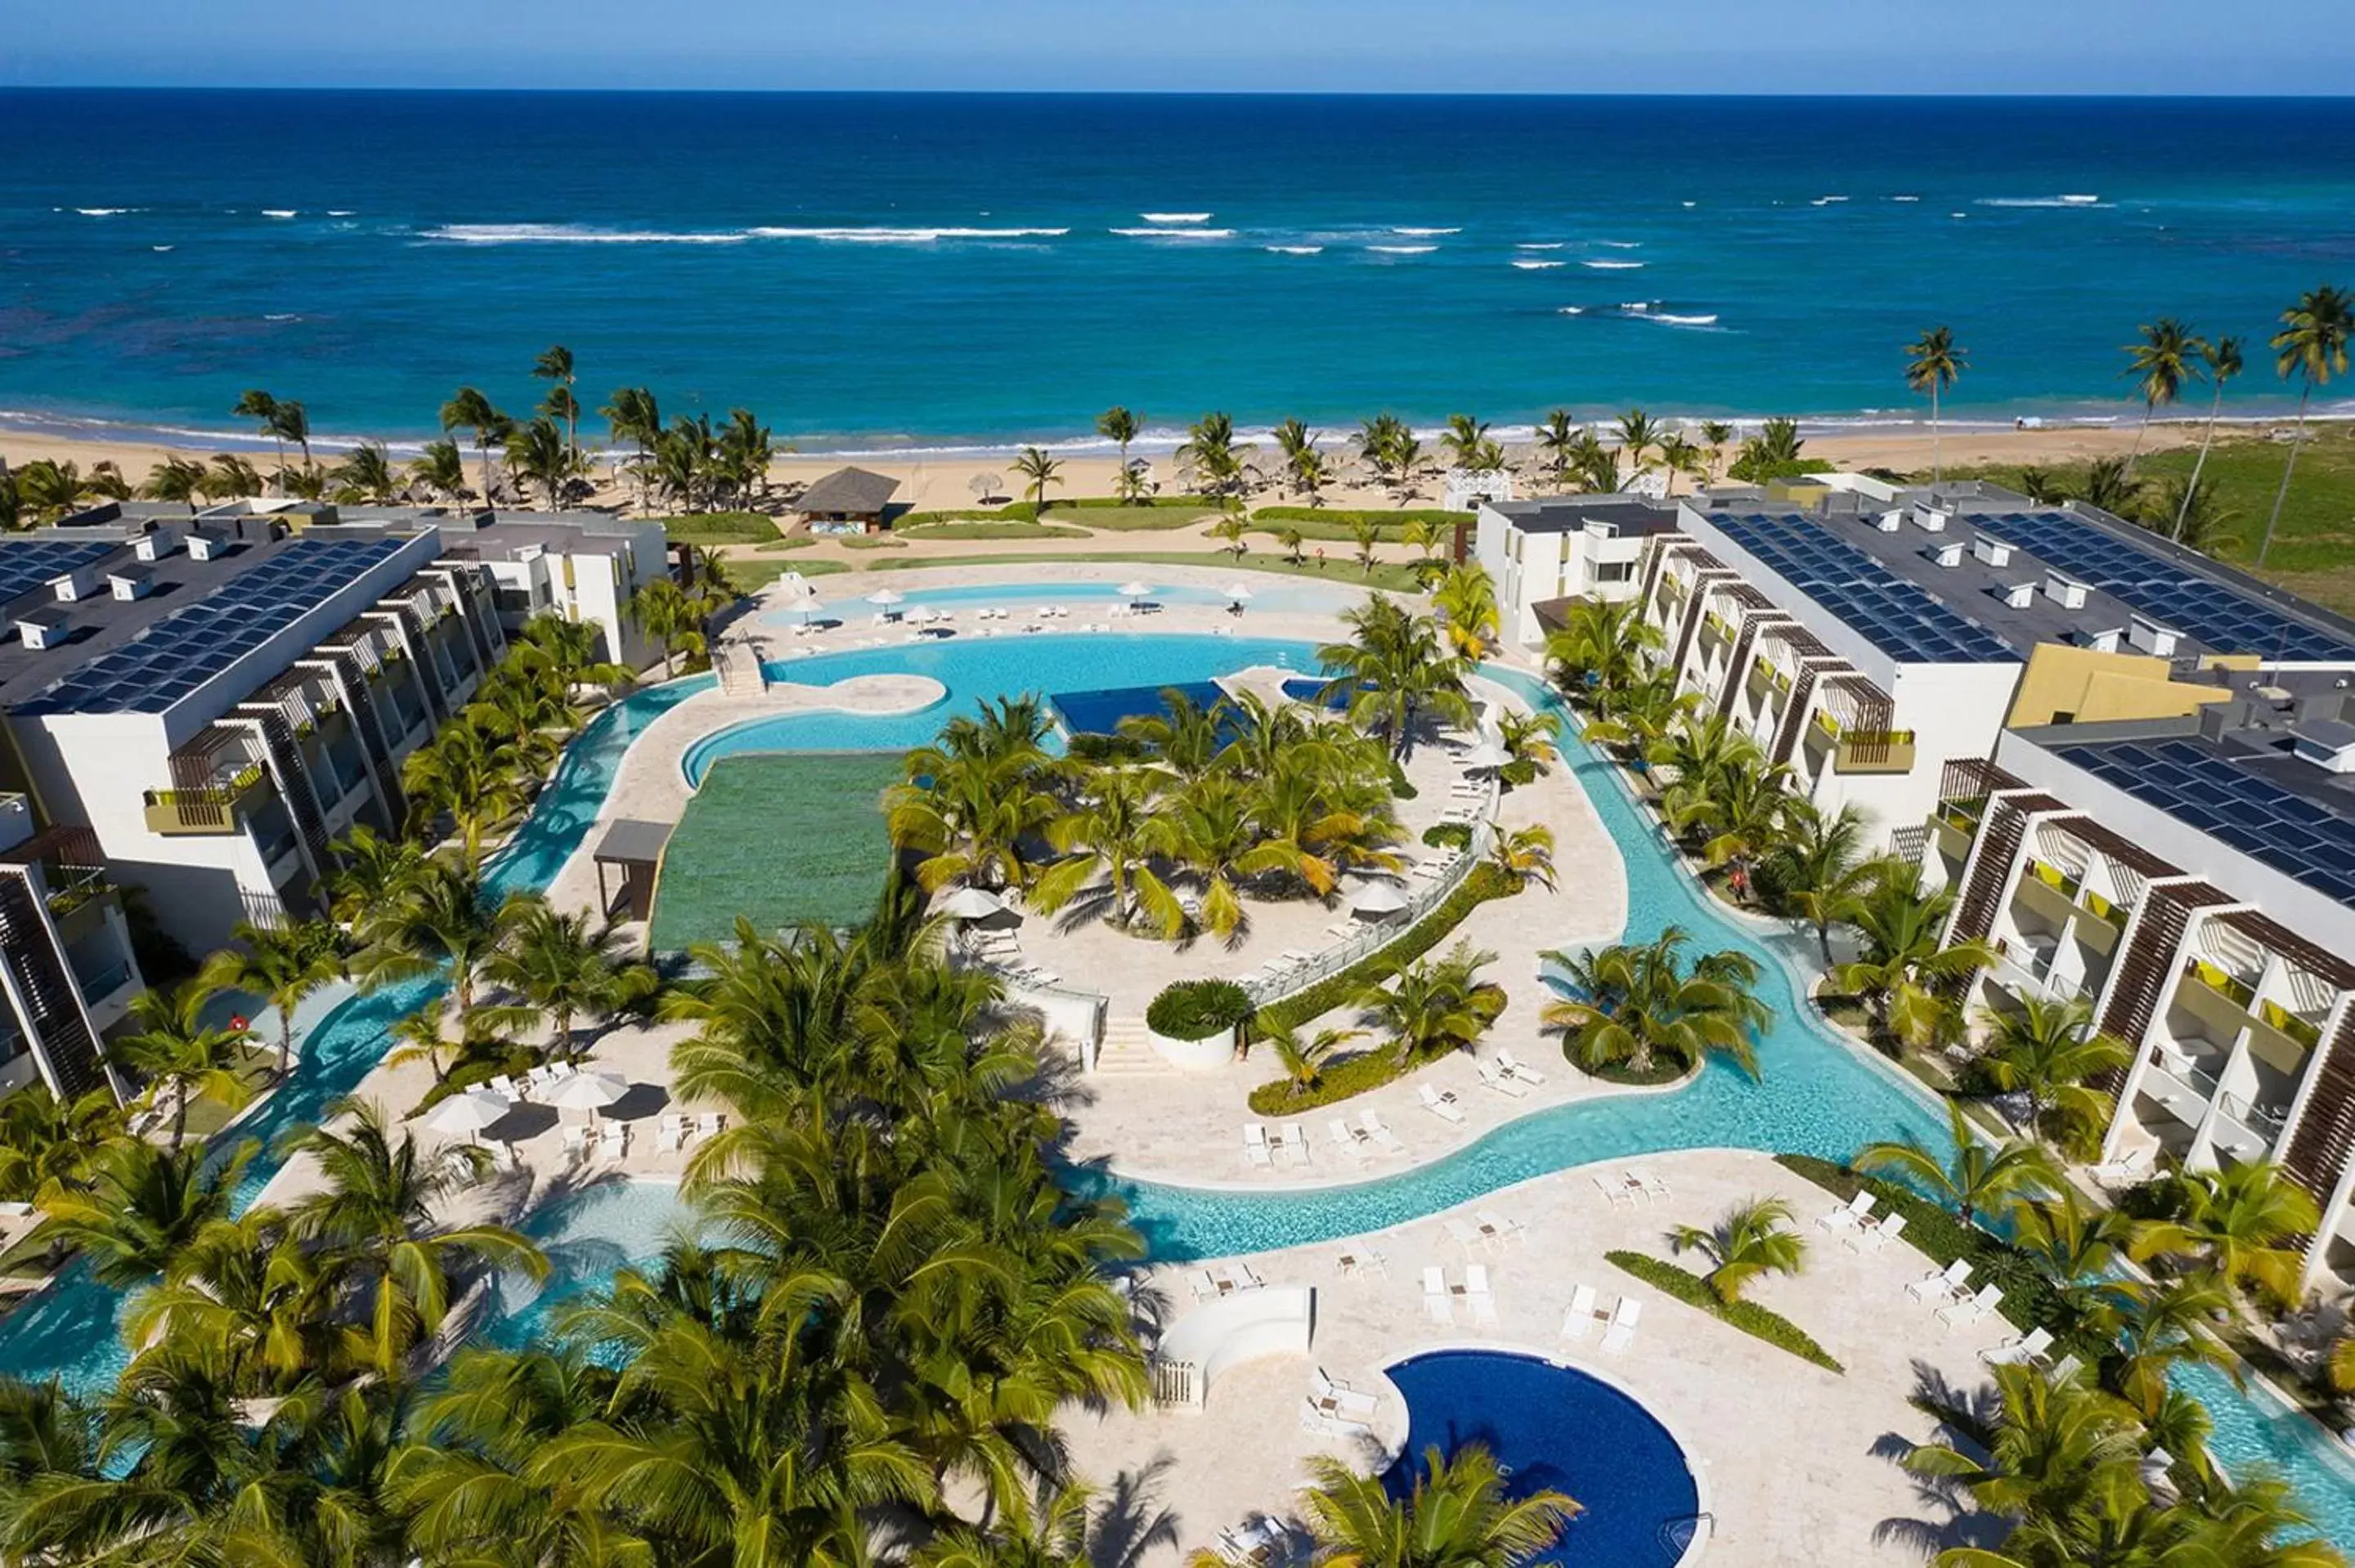 Bird's eye view, Pool View in Dreams Onyx Resort & Spa - All Inclusive